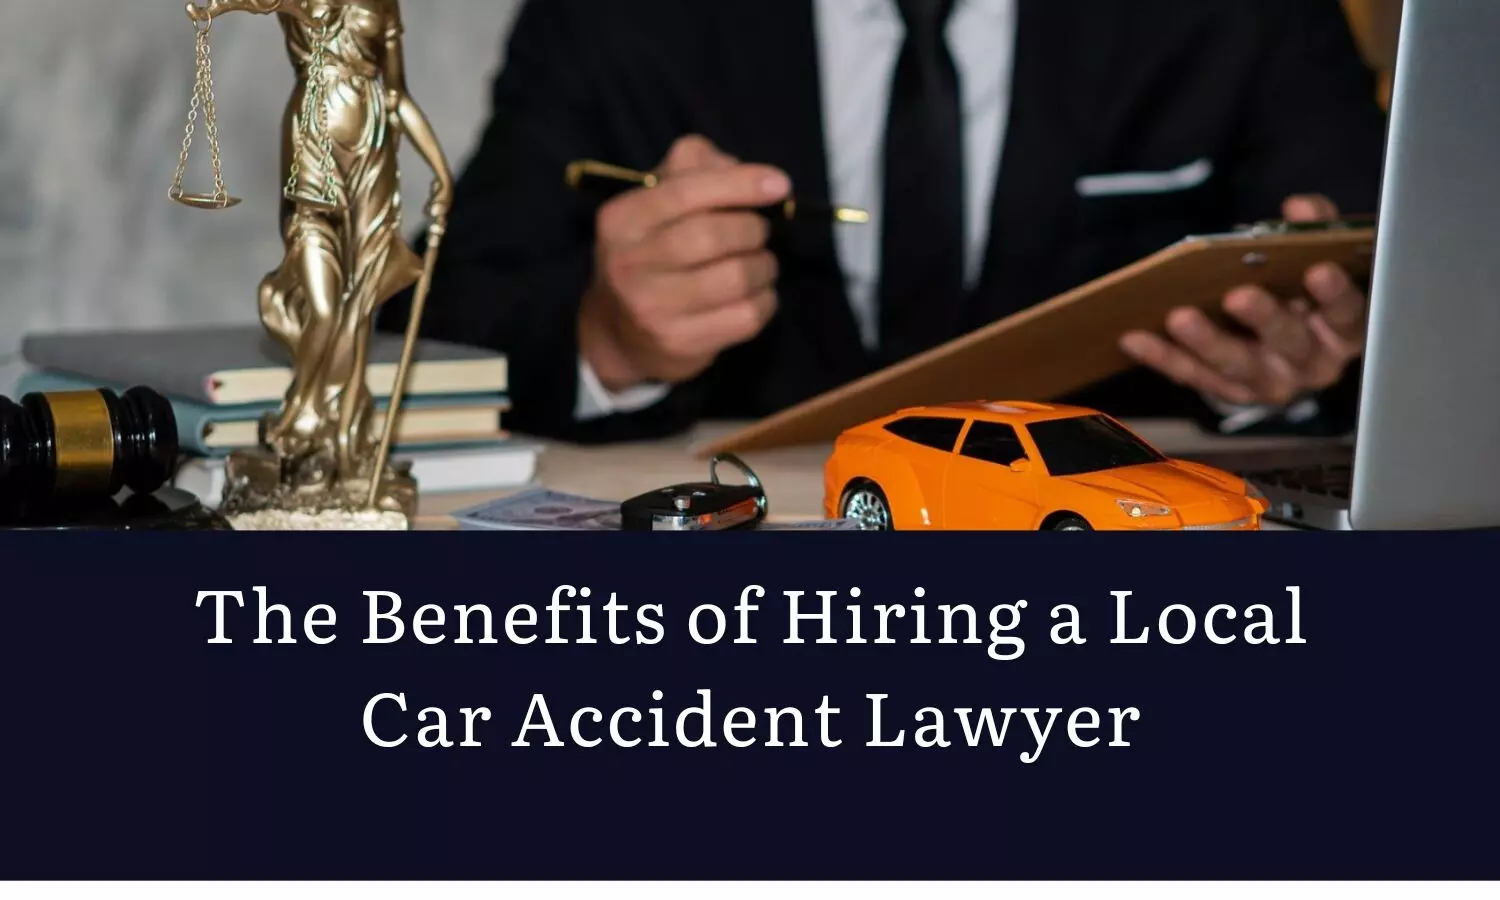 The Benefits of Hiring a Local Car Accident Lawyer